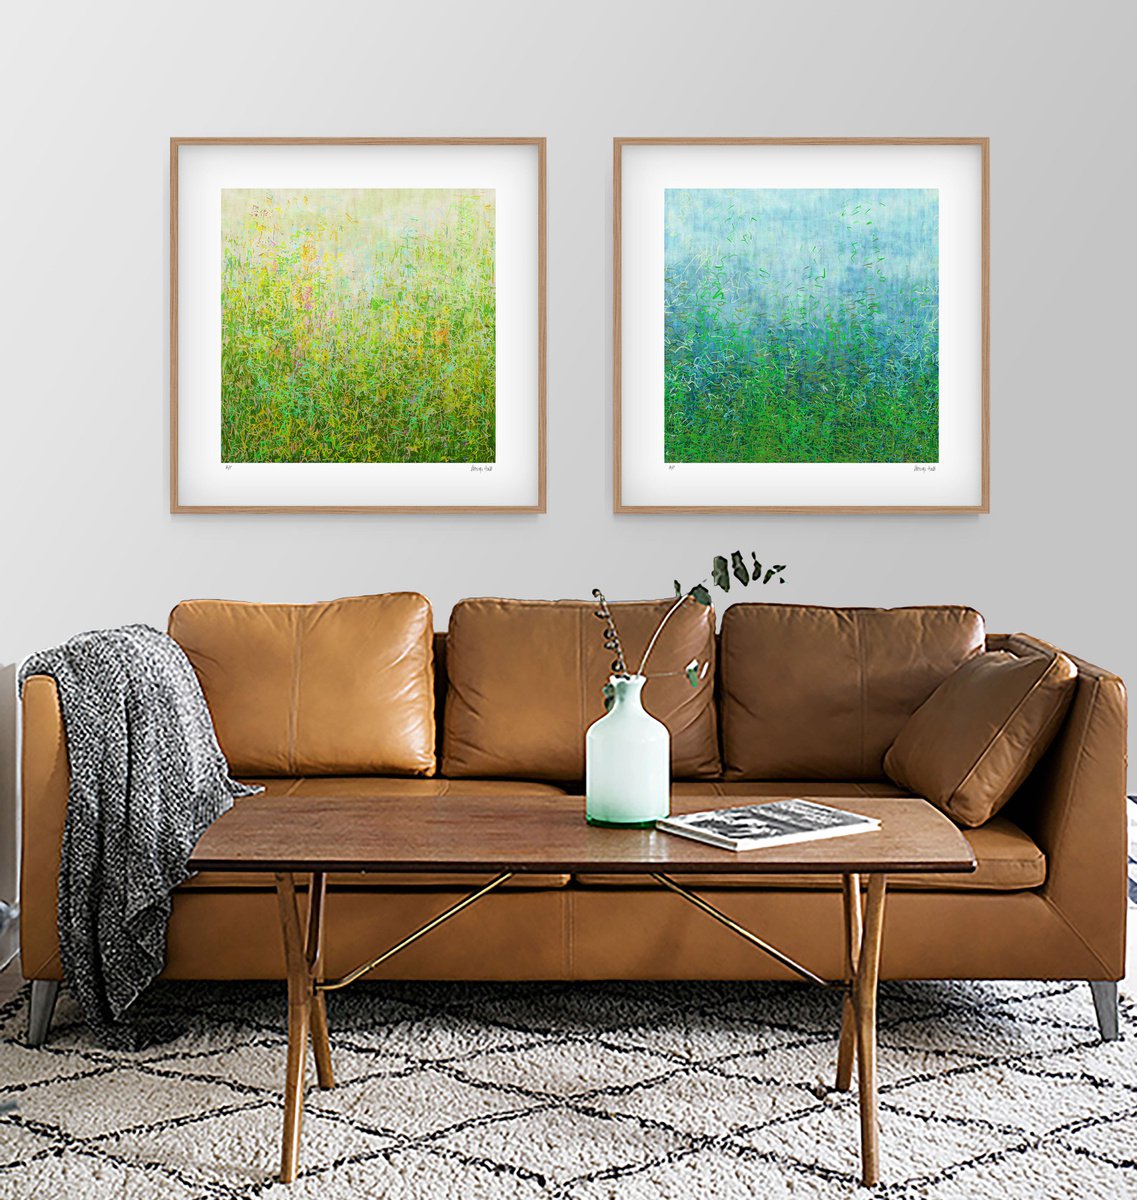 Garden Series - Set of 2 - 84cm ea - Limited Edition Paper Prints *UNFRAMED* by George Hall